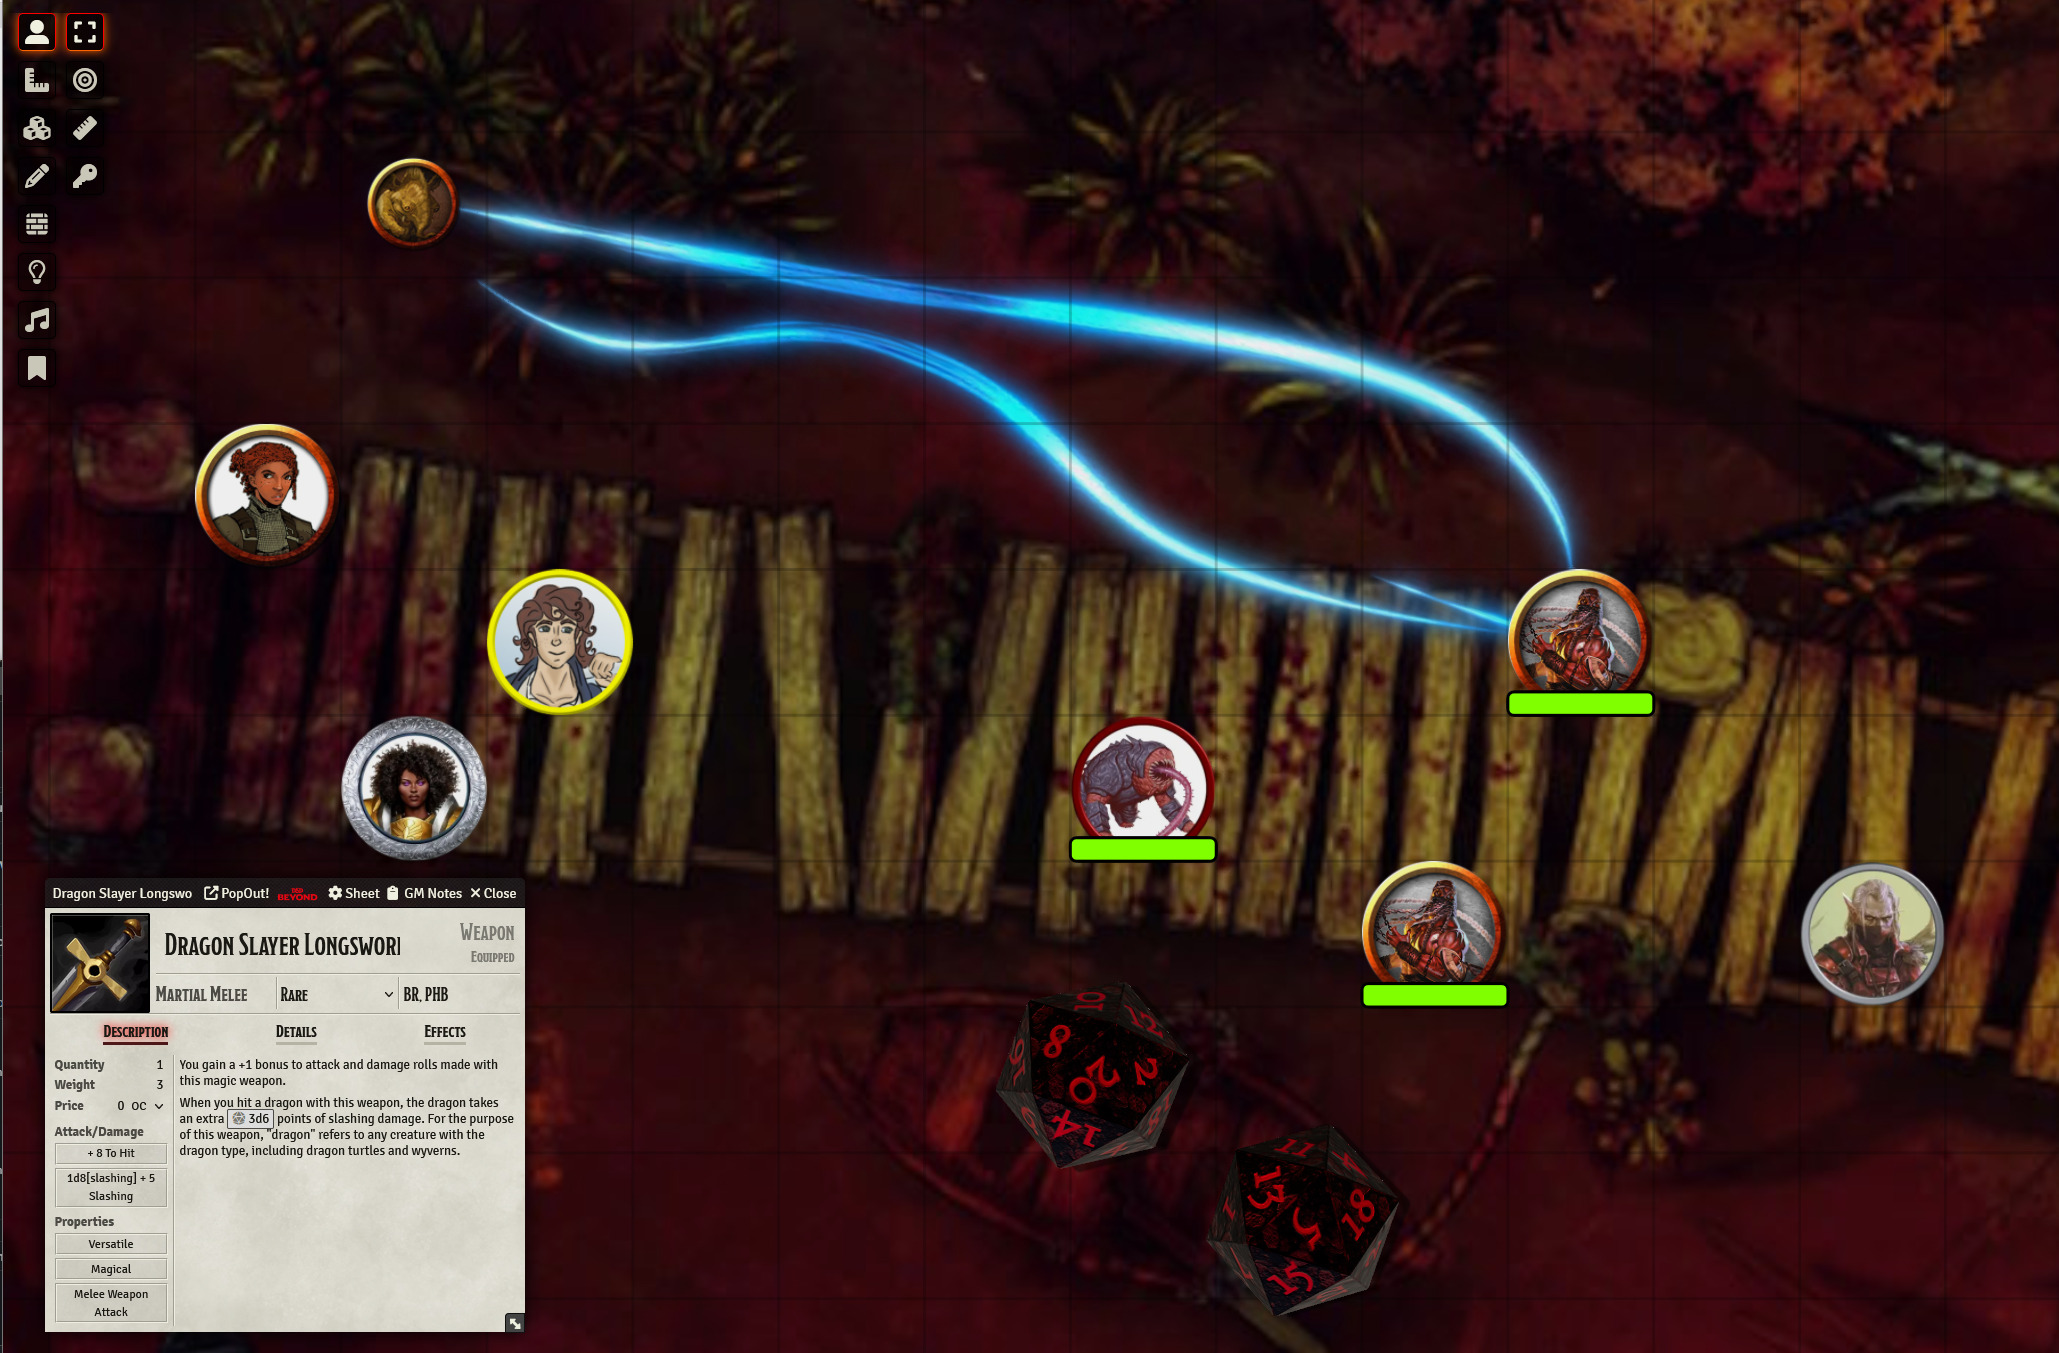 Screenshot from FoundryVTT, showing a party of three adventurers crossing a rickety bridge through a blood-red swamp, facing off against a handful of fiends coming the other way. A popup item card for a "Dragon Slayer Longsword" is visible, along with two 20-sided dice.